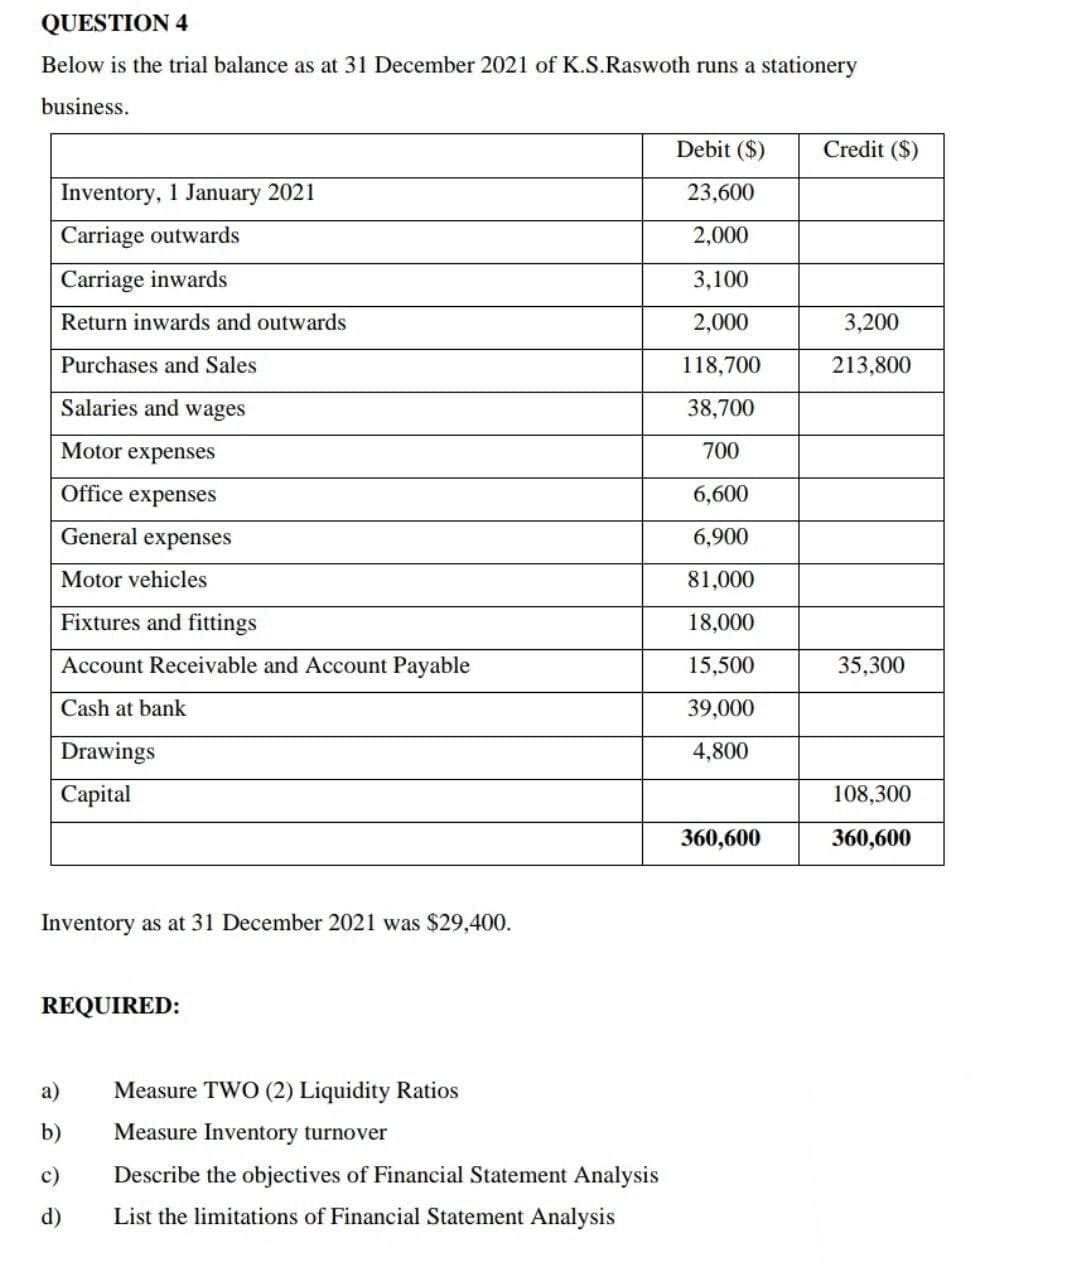 QUESTION 4
Below is the trial balance as at 31 December 2021 of K.S.Raswoth runs a stationery
business.
Inventory, 1 January 2021
Carriage outwards
Carriage inwards
Return inwards and outwards
Purchases and Sales
Salaries and wages
Motor expenses
Office expenses
General expenses
Motor vehicles
Fixtures and fittings
Account Receivable and Account Payable
Cash at bank
Drawings
Capital
Inventory as at 31 December 2021 was $29,400.
REQUIRED:
a)
b)
c)
d)
Measure TWO (2) Liquidity Ratios
Measure Inventory turnover
Describe the objectives of Financial Statement Analysis
List the limitations of Financial Statement Analysis
Debit ($)
23,600
2,000
3,100
2,000
118,700
38,700
700
6,600
6,900
81,000
18,000
15,500
39,000
4,800
360,600
Credit ($)
3,200
213,800
35,300
108,300
360,600